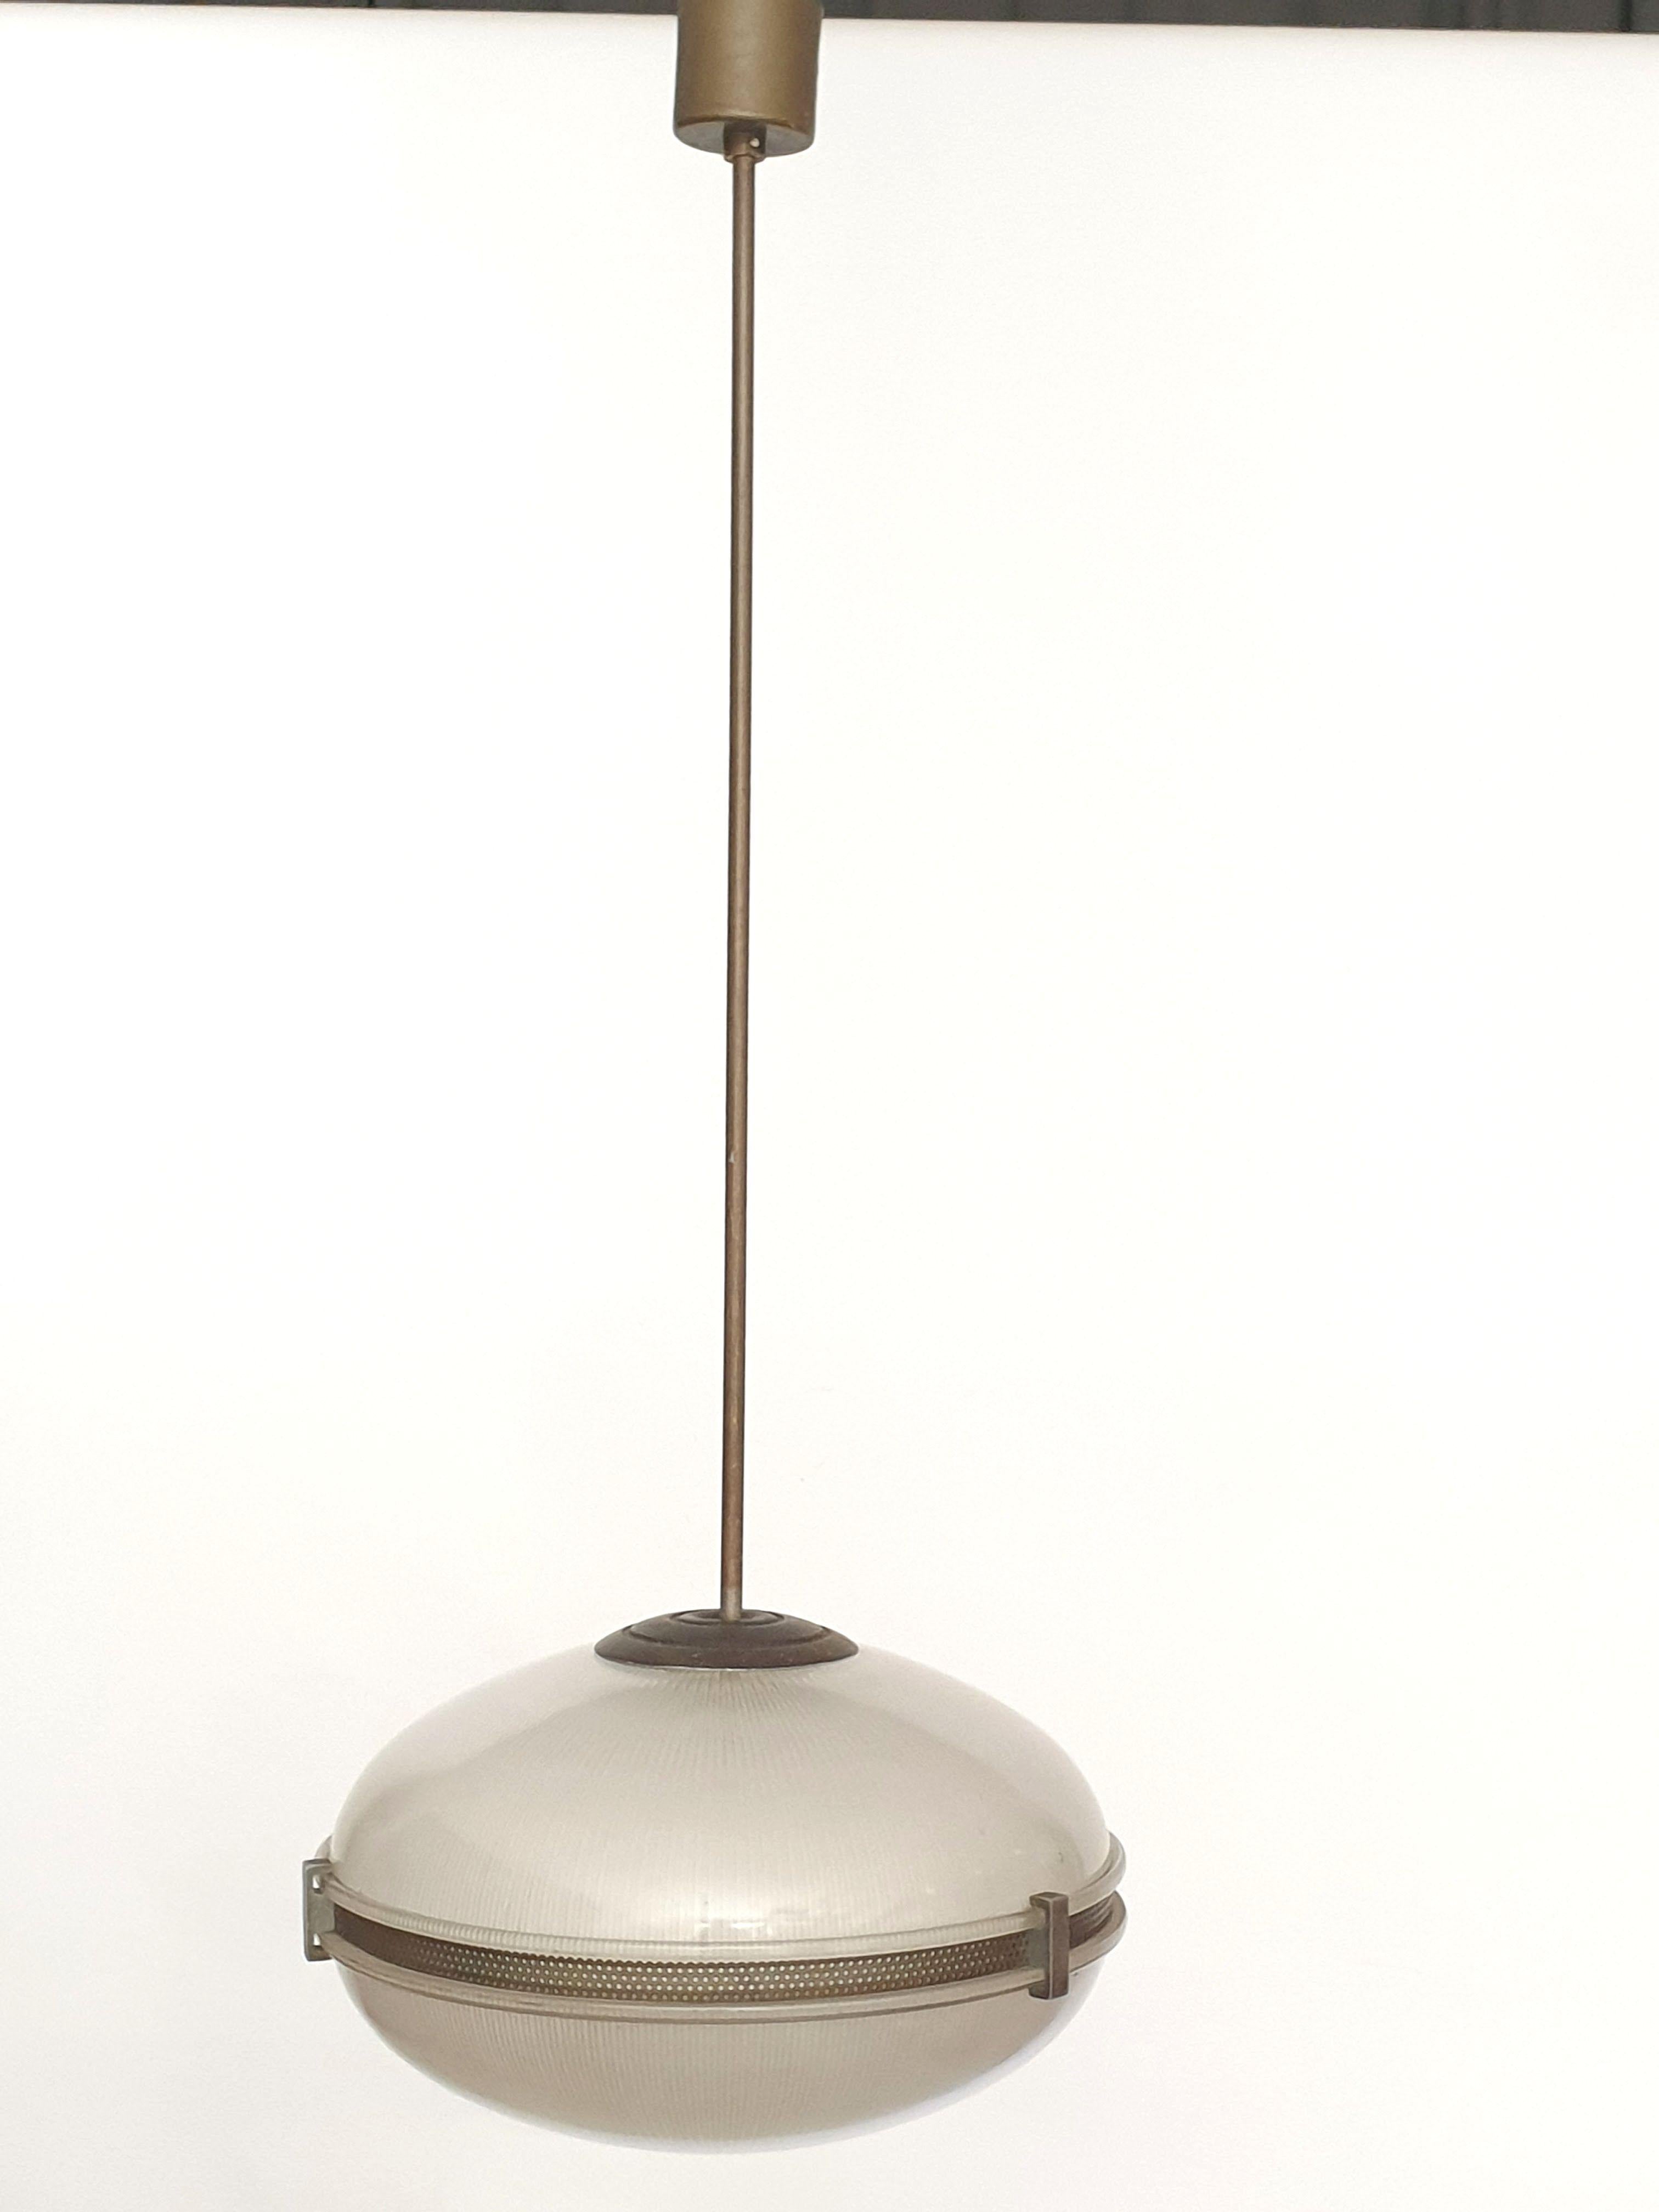 Pendant light in grey tinged glass with ribbed detail. The sections are held together with bronzed metal fixings and a bronzed perforated metal edging. There is a bronzed metal pole which could be cut if required.